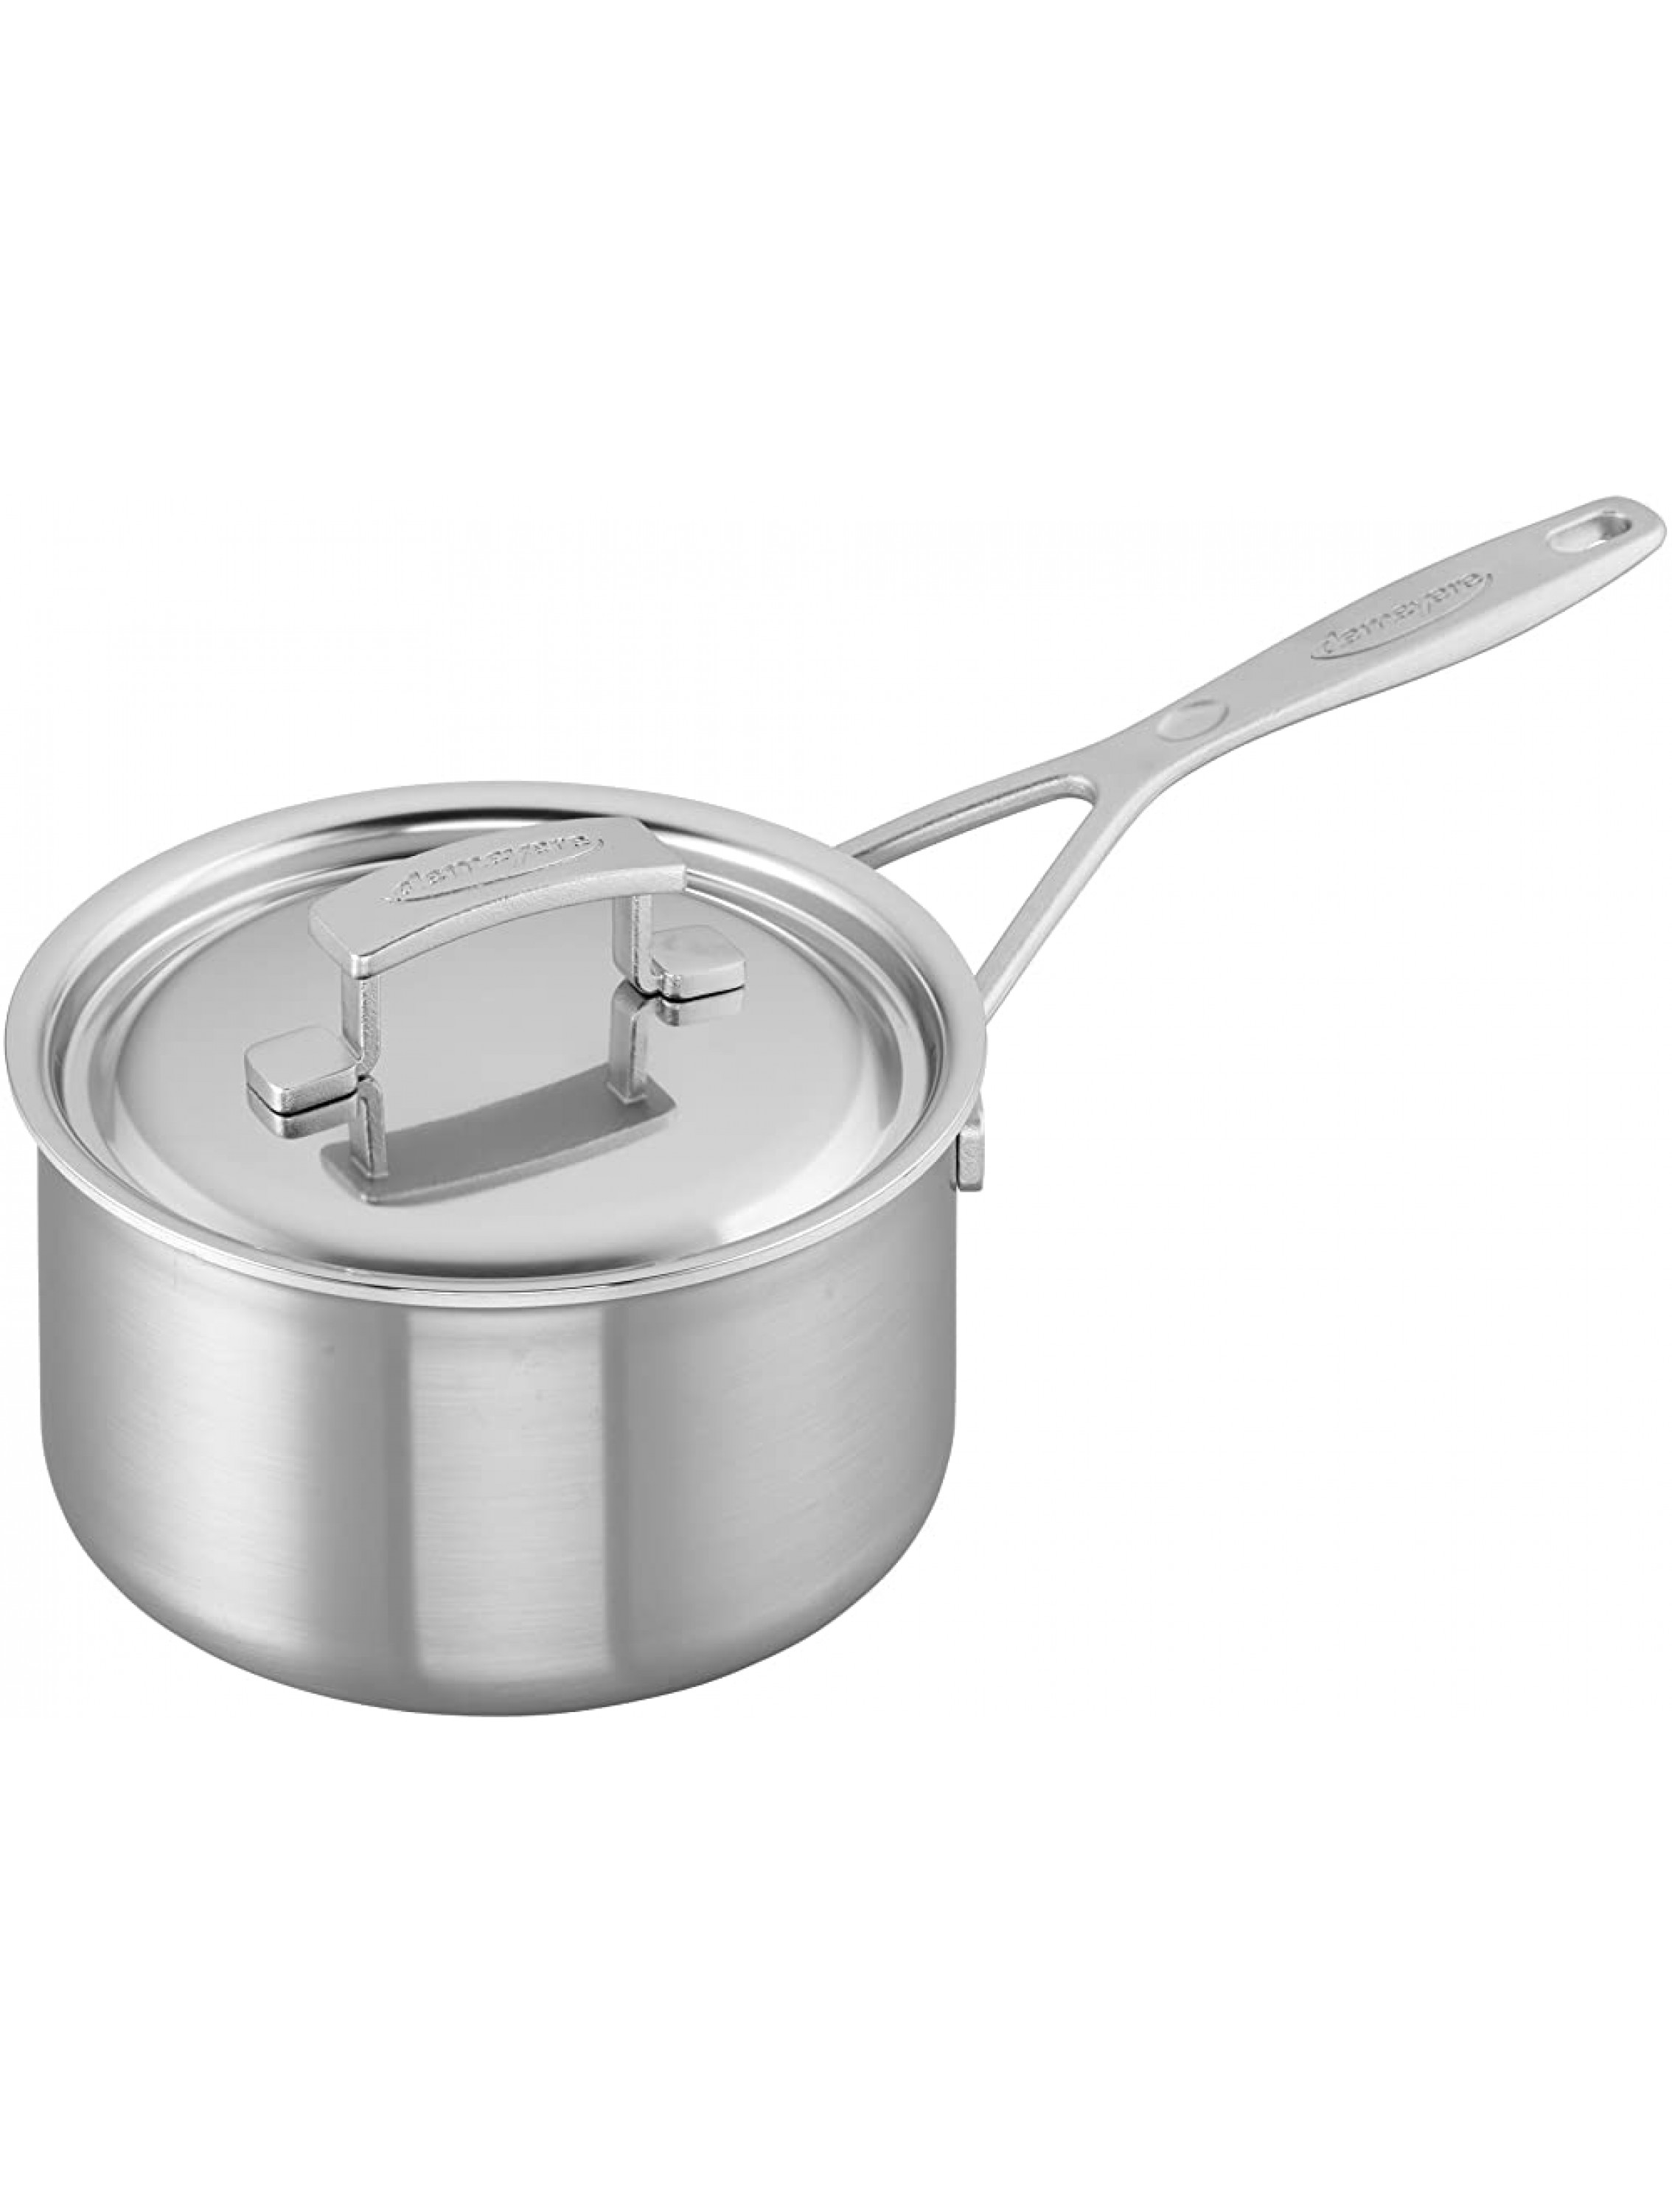 Demeyere Industry 5-Ply 2-qt Stainless Steel Saucepan - B08H9HS2H